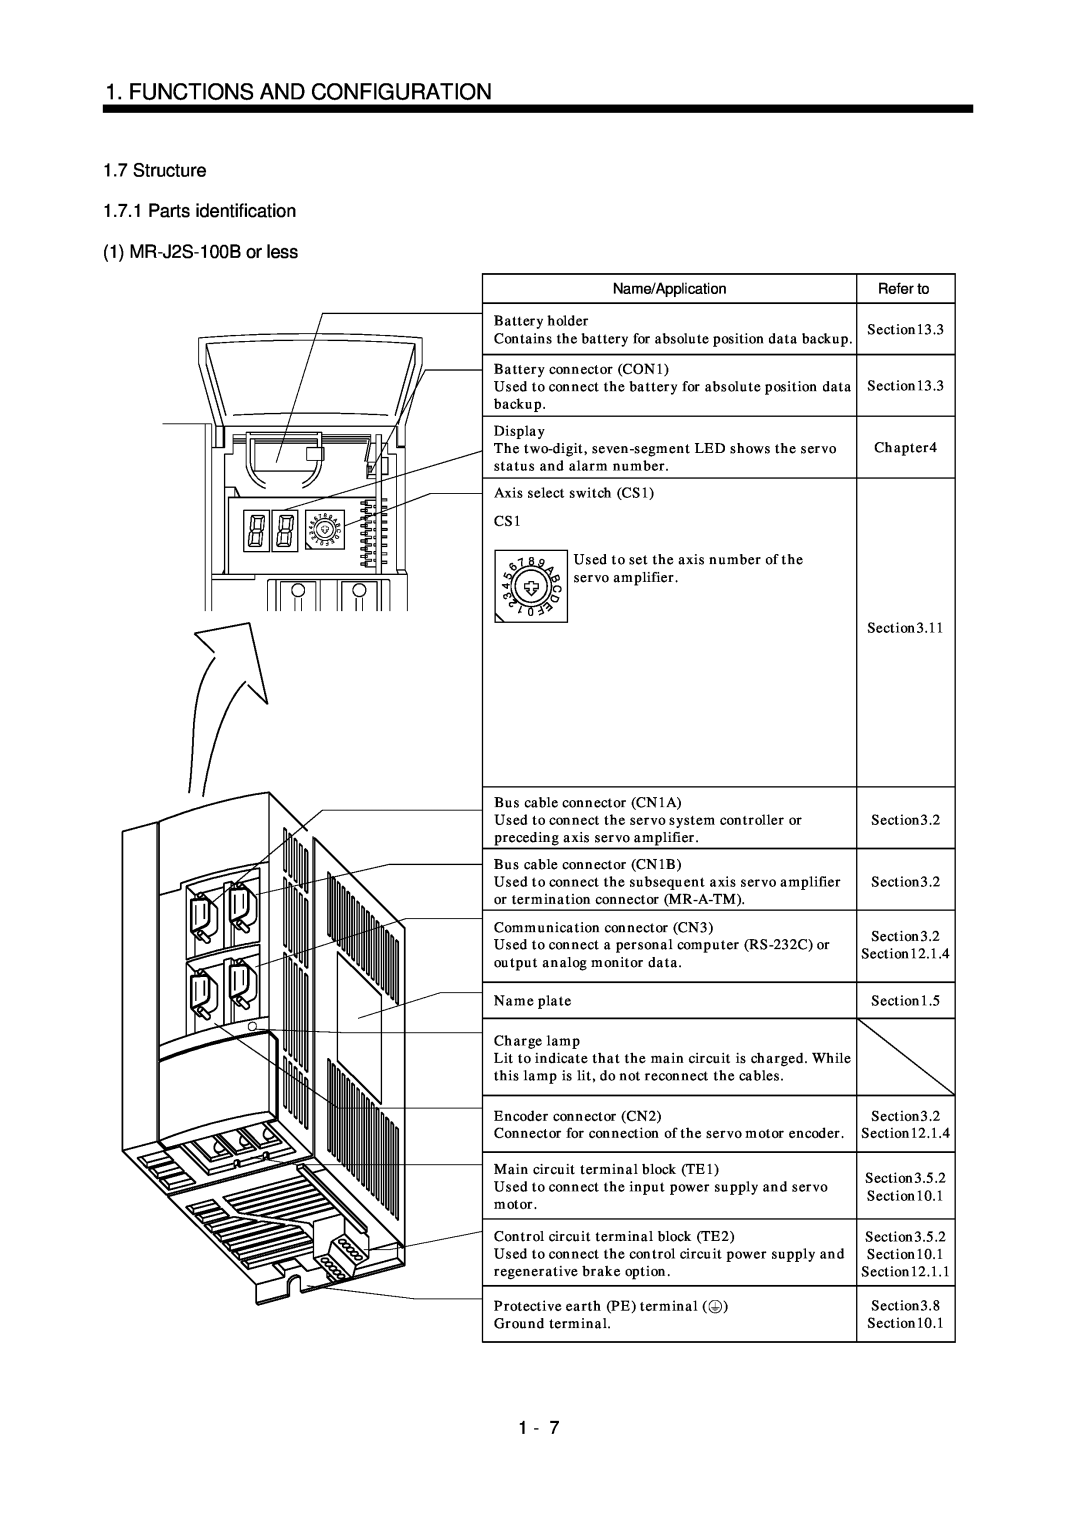 Bose MR-J2S- B Structure 1.7.1Parts identification, MR-J2S-100Bor less, Functions And Configuration, Name/Application 